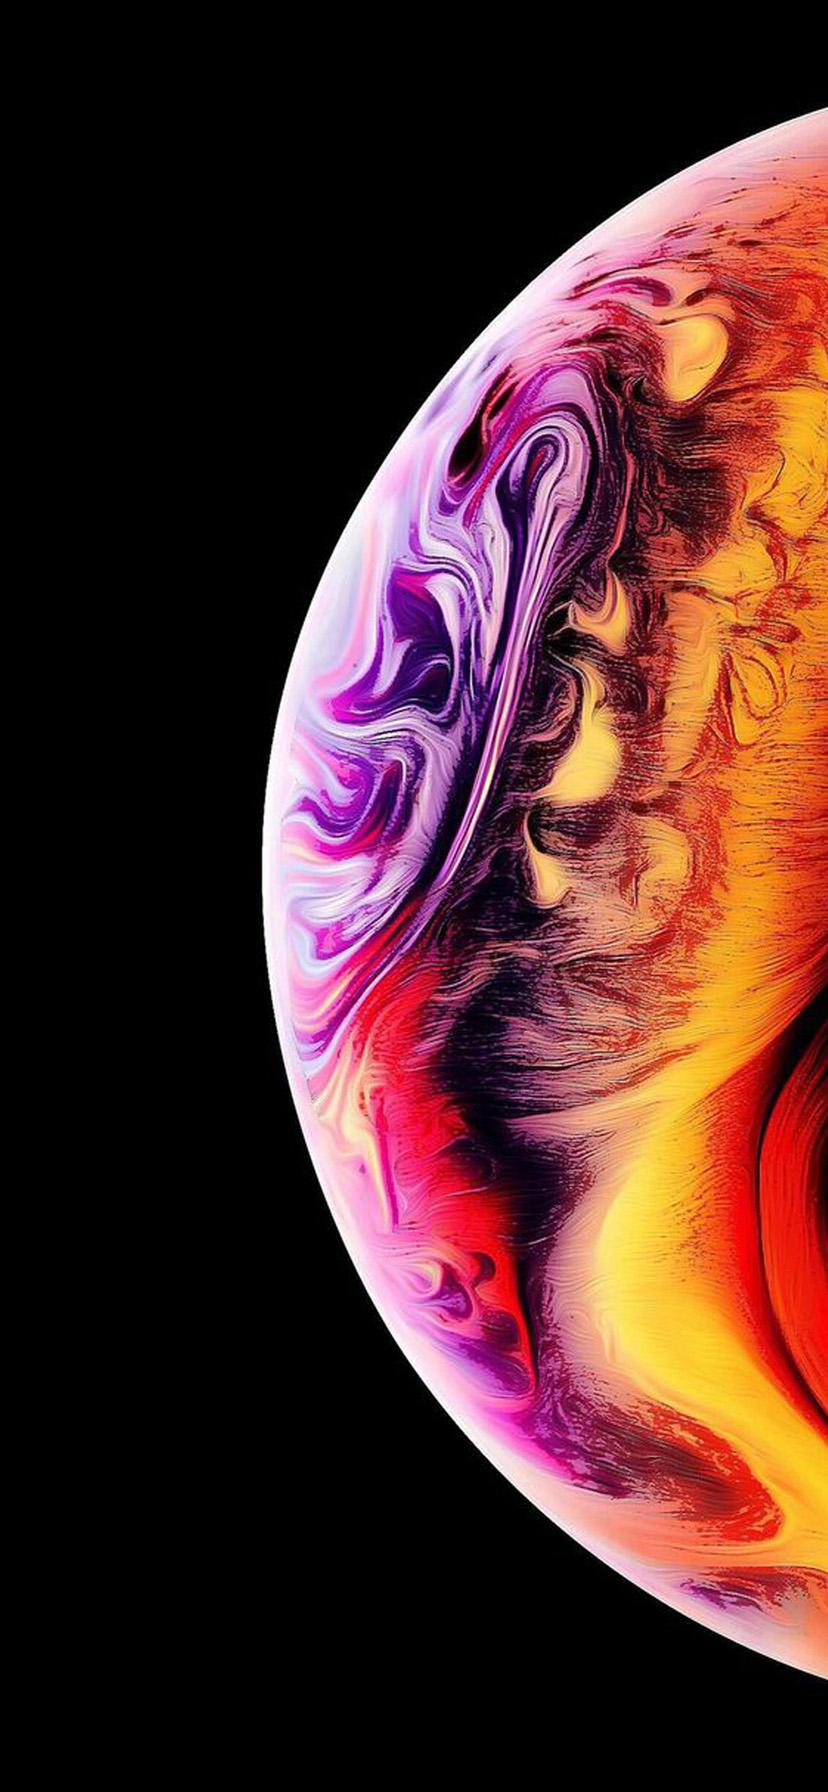 44 iPhone XR wallpapers [Download Free]